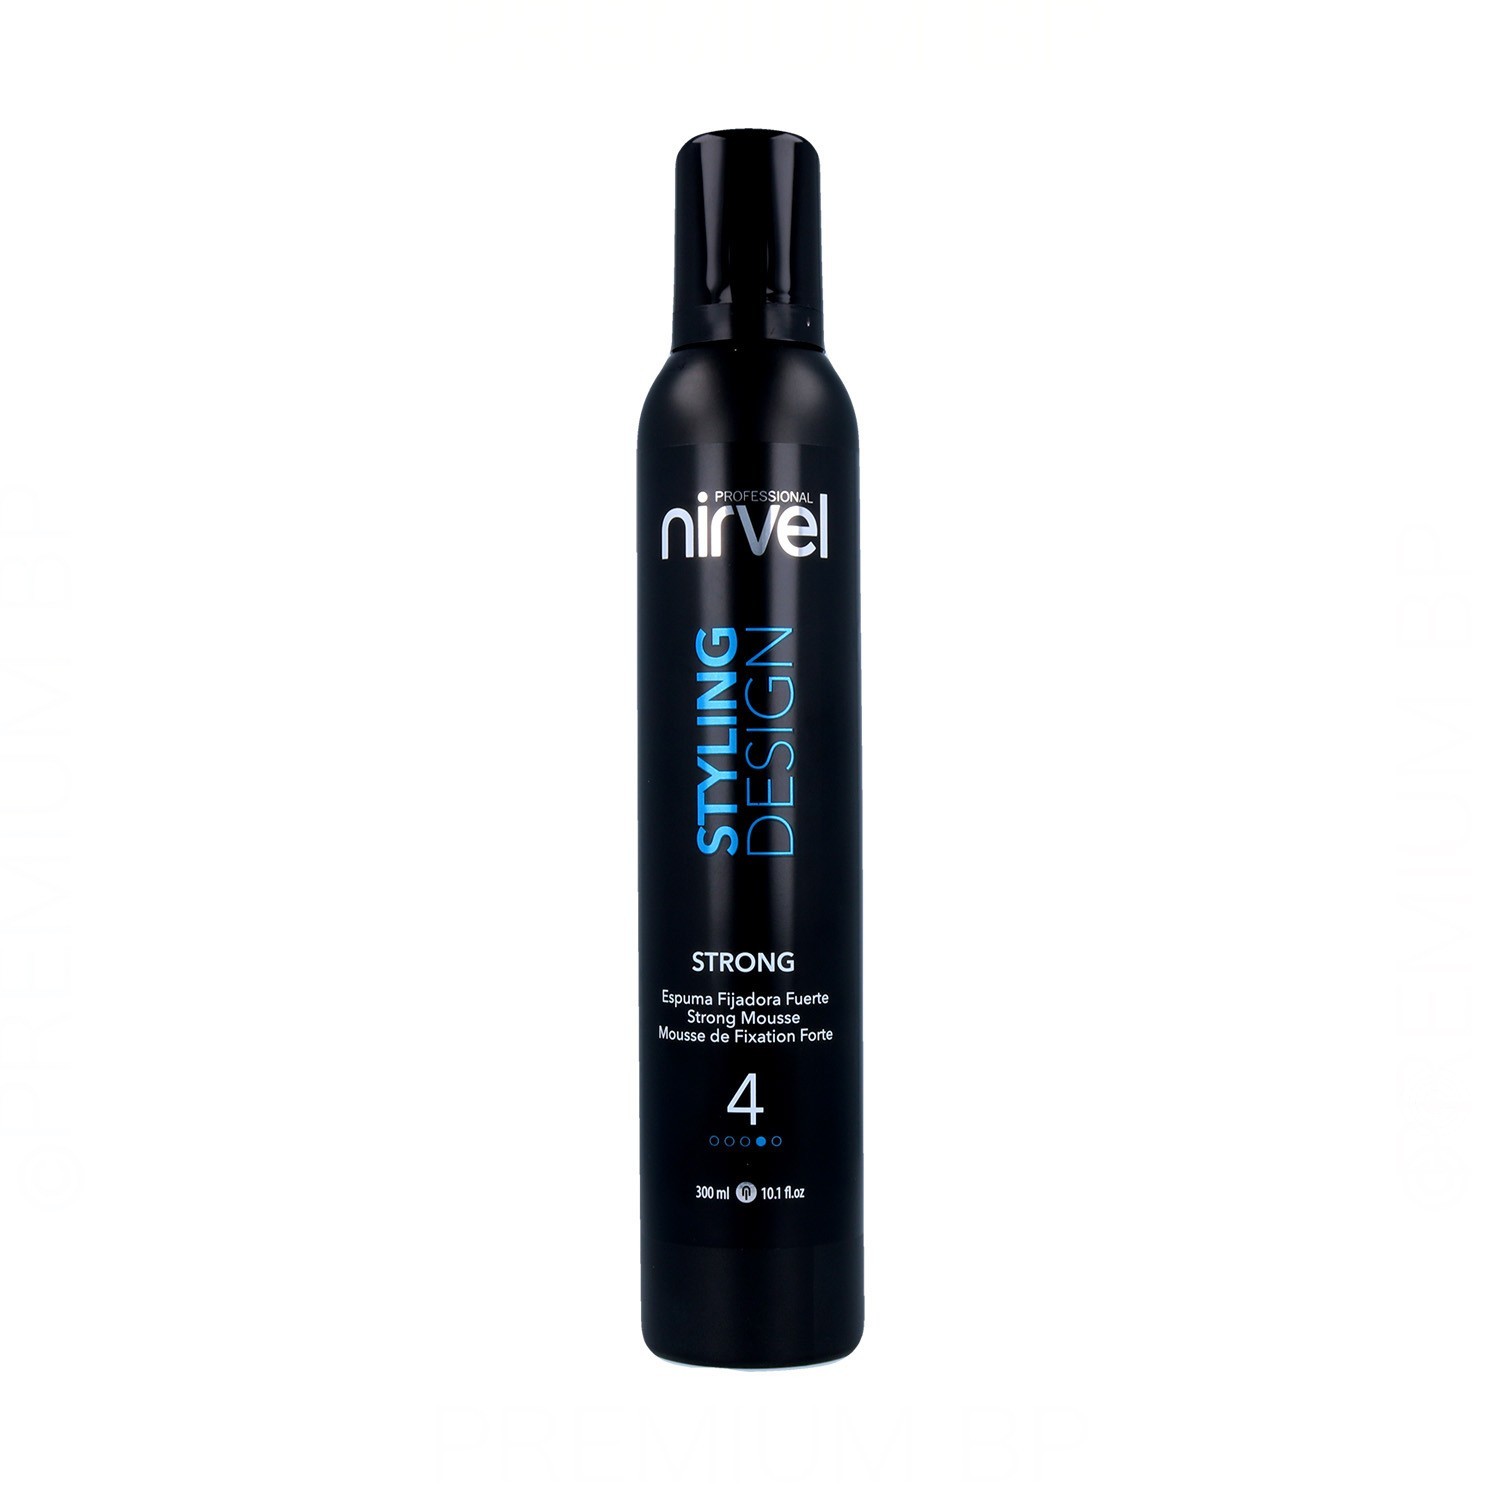 Nirvel Styling Mousse Strong (4) 300ml